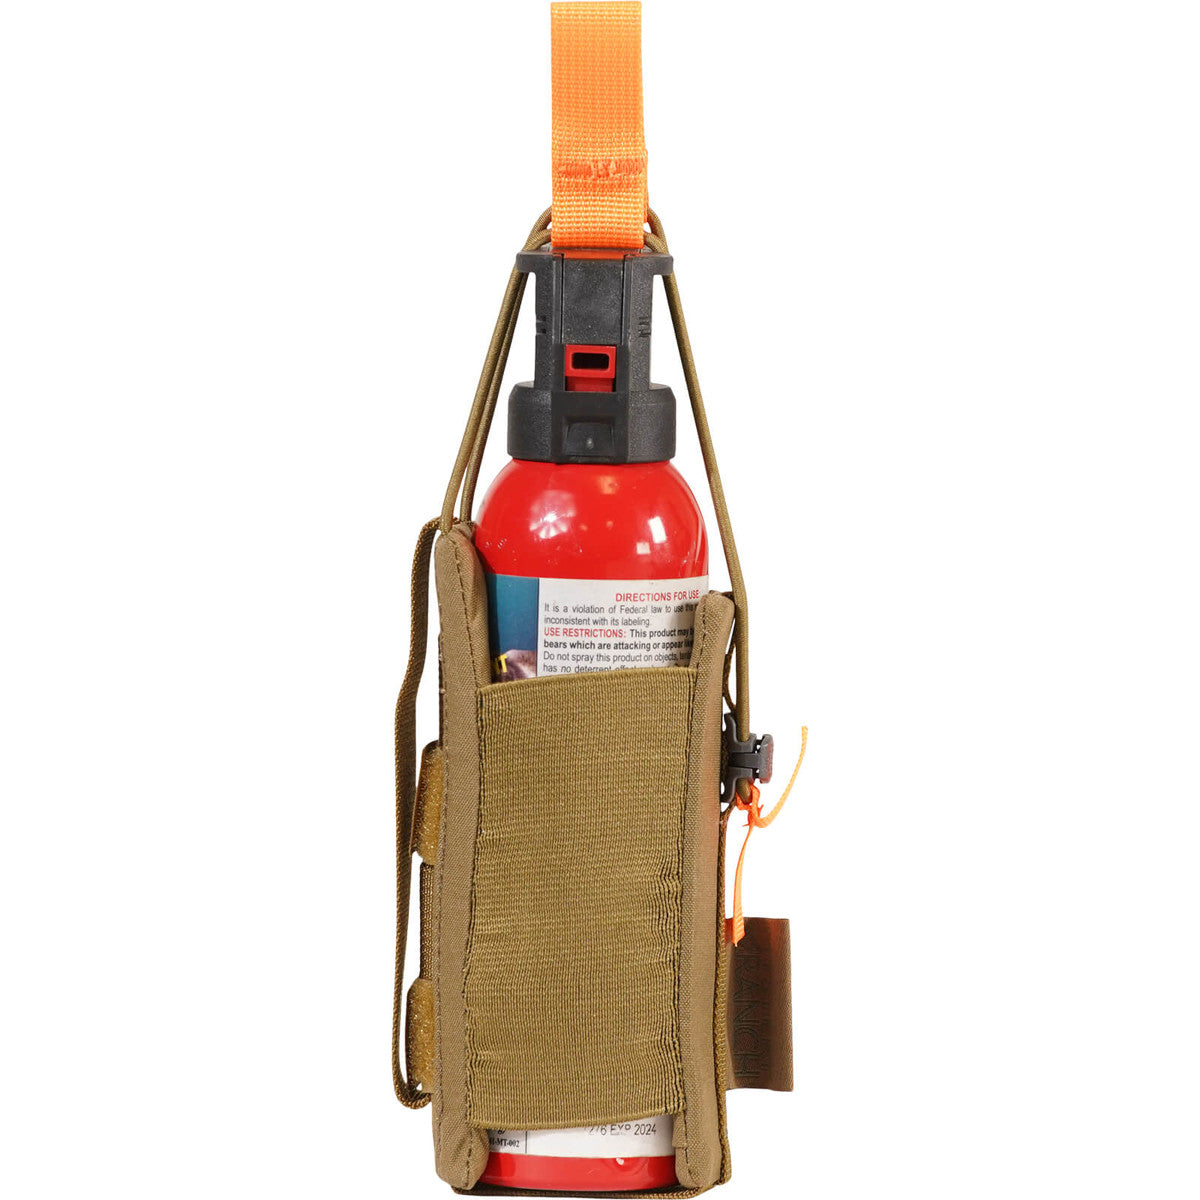 Bear Spray Holster in Coyote